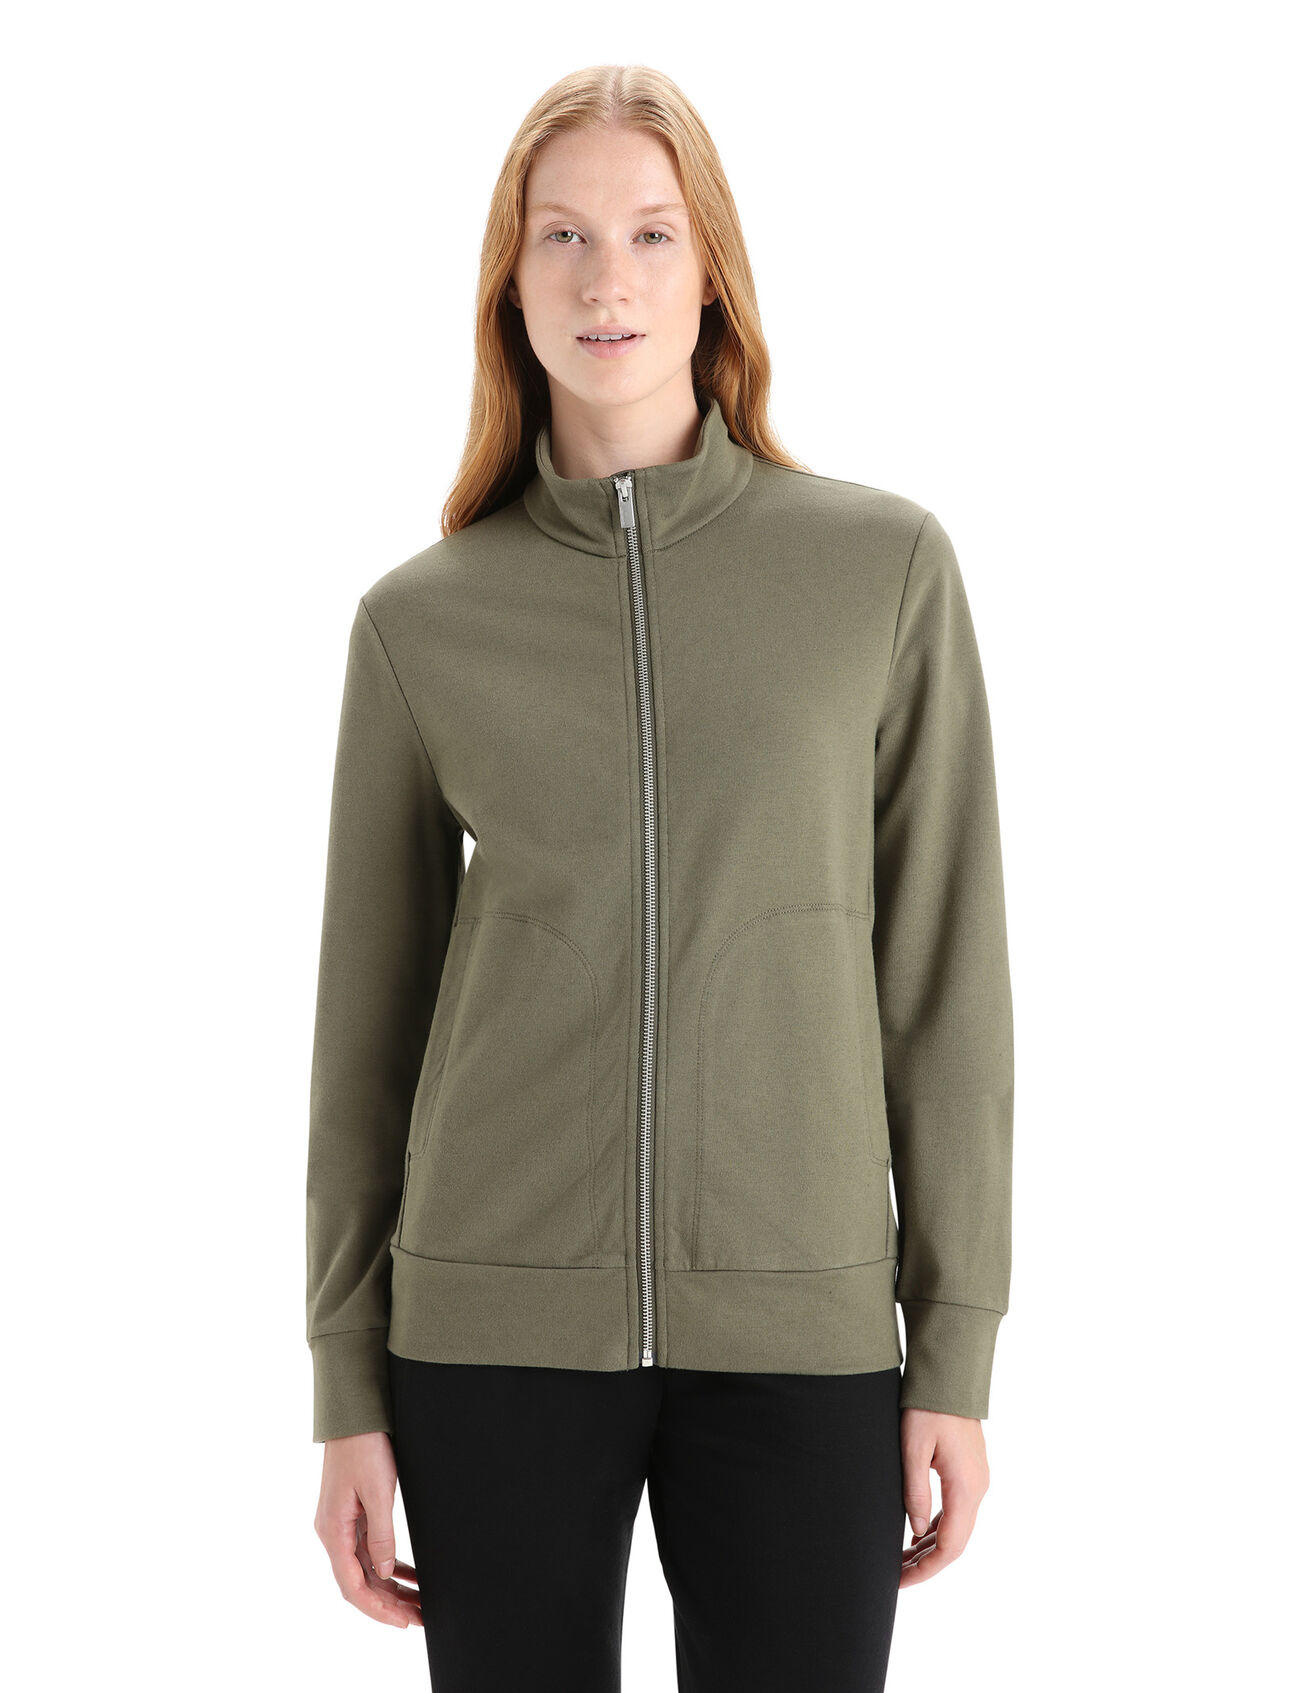 Womens Merino Central Classic Long Sleeve Zip Sweatshirt A stylish, classic and comfortable everyday sweatshirt that blends natural merino wool with organic cotton, the Central Classic Long Sleeve Zip is an everyday staple that's breathable and incredibly versatile.